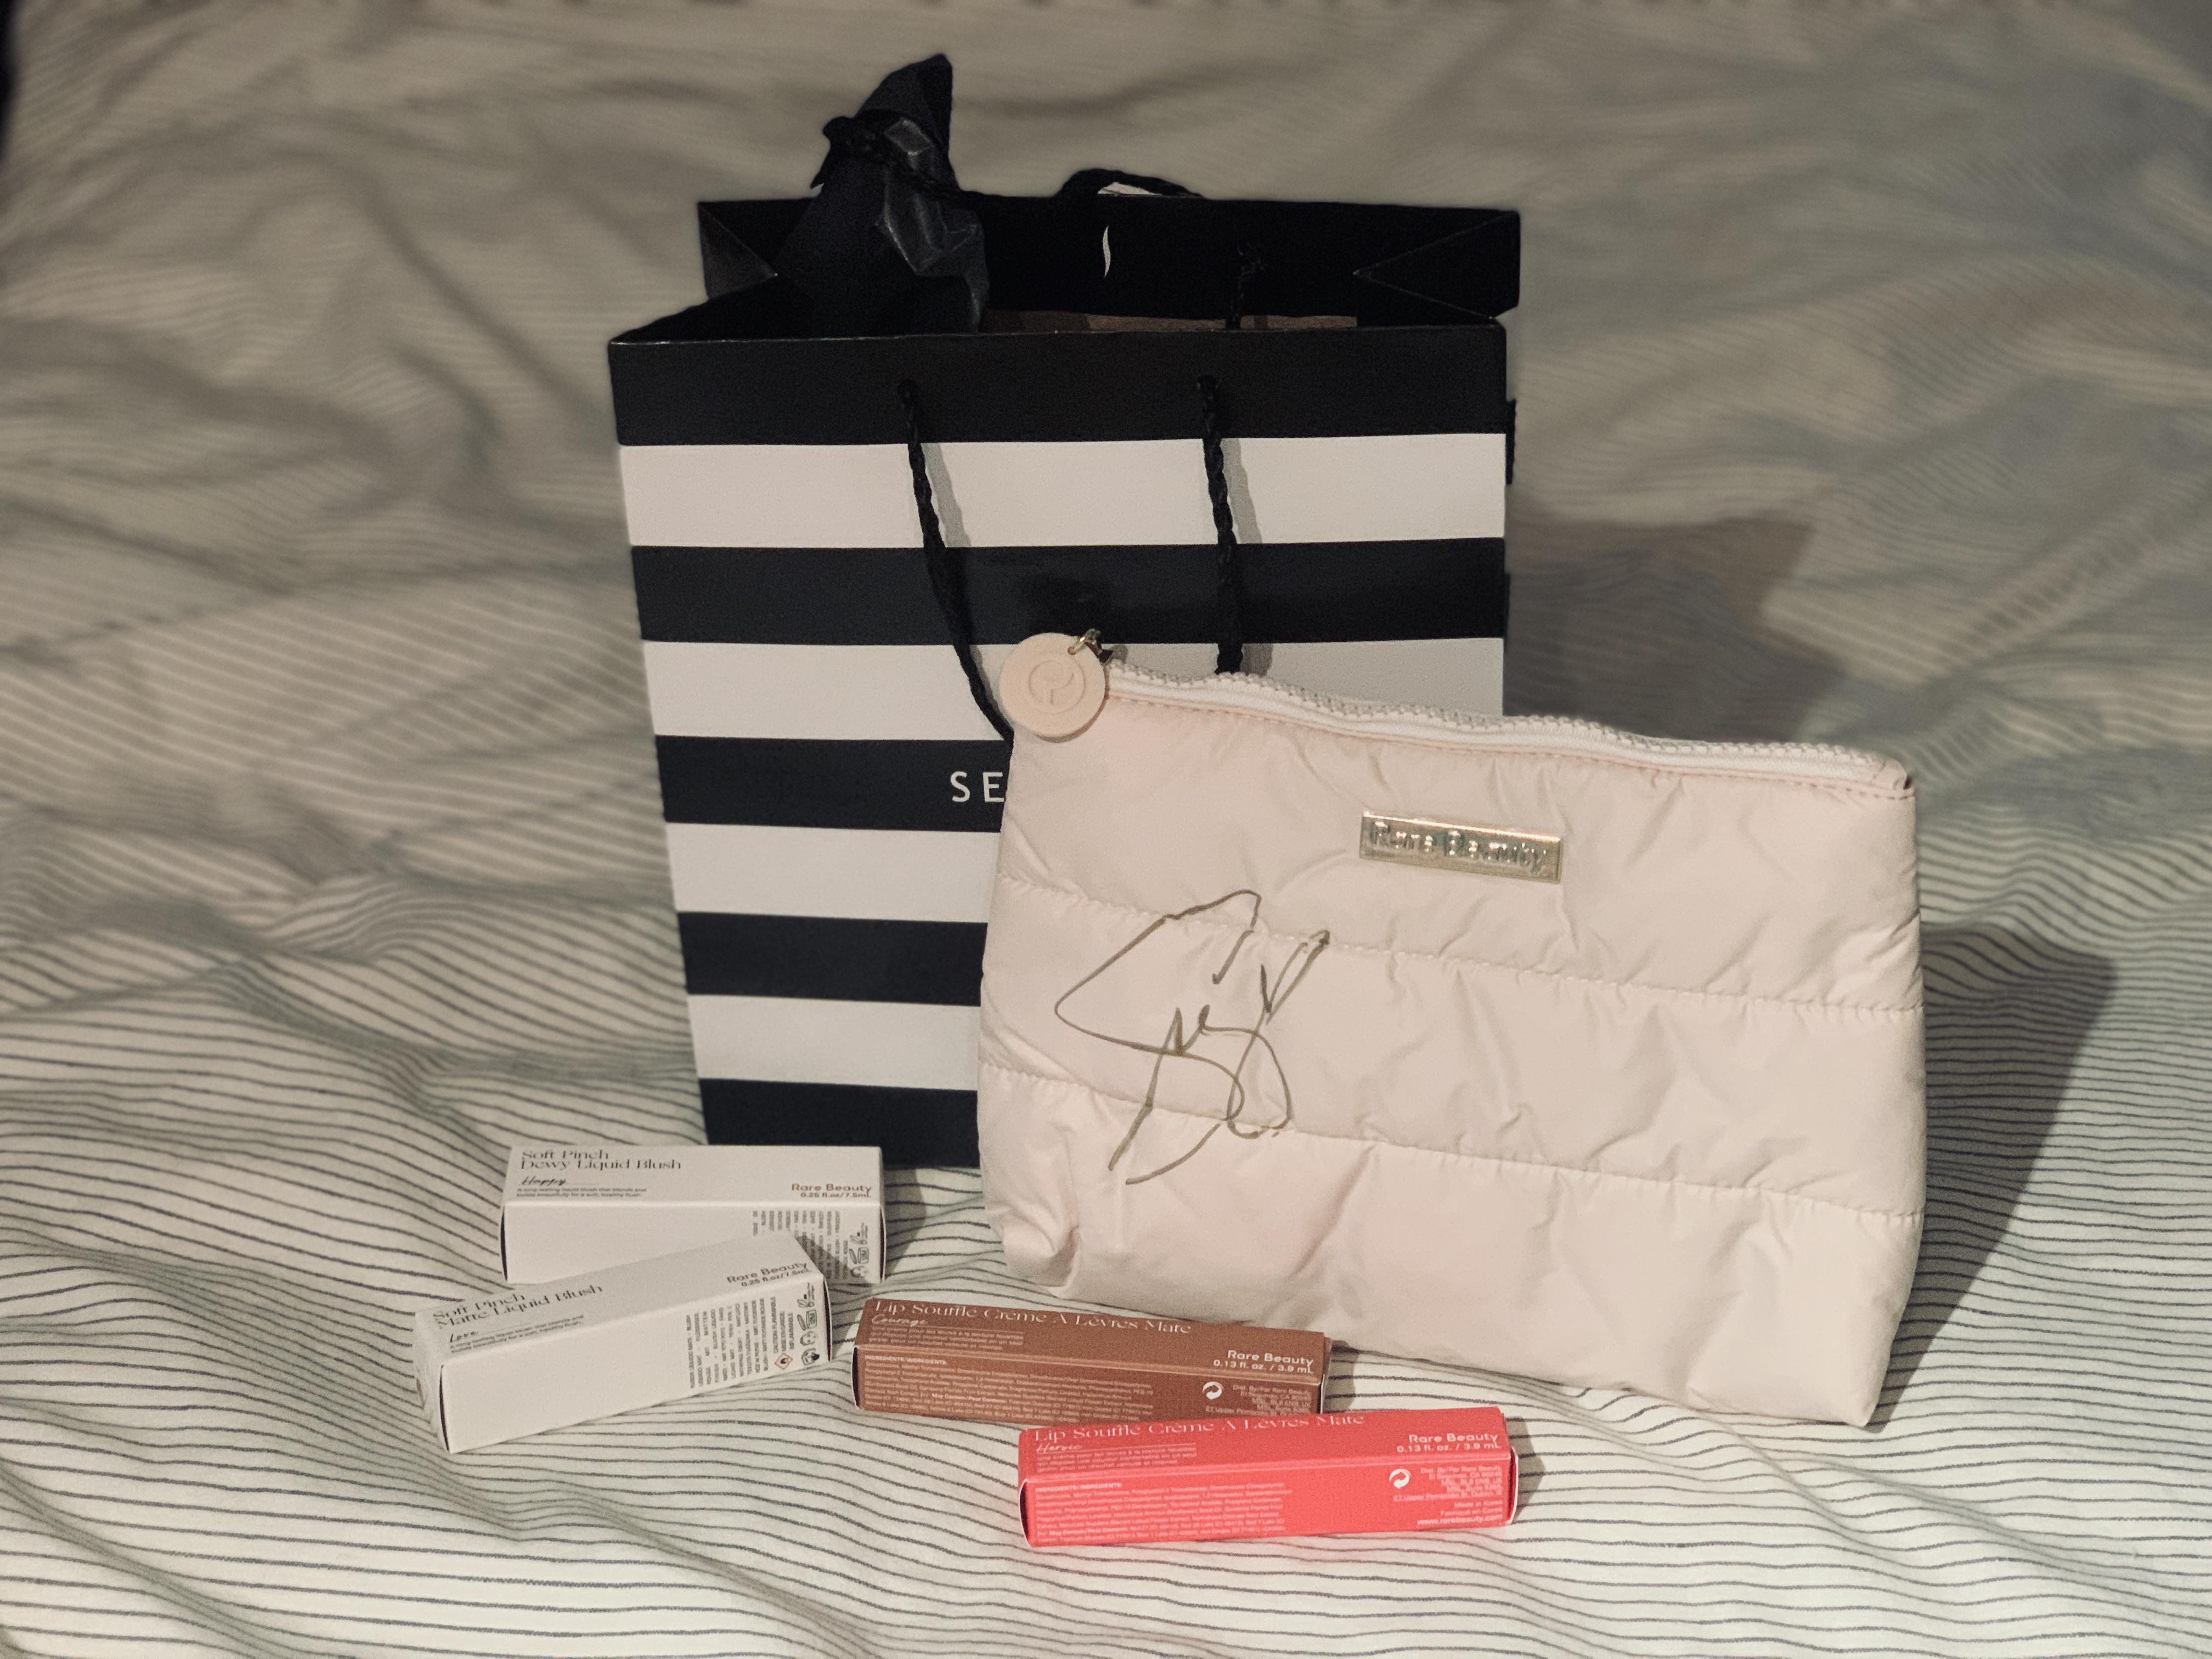 Rare Beauty Mini-Haul with In-Store Autographed Makeup Bag GWP! | Scrolller